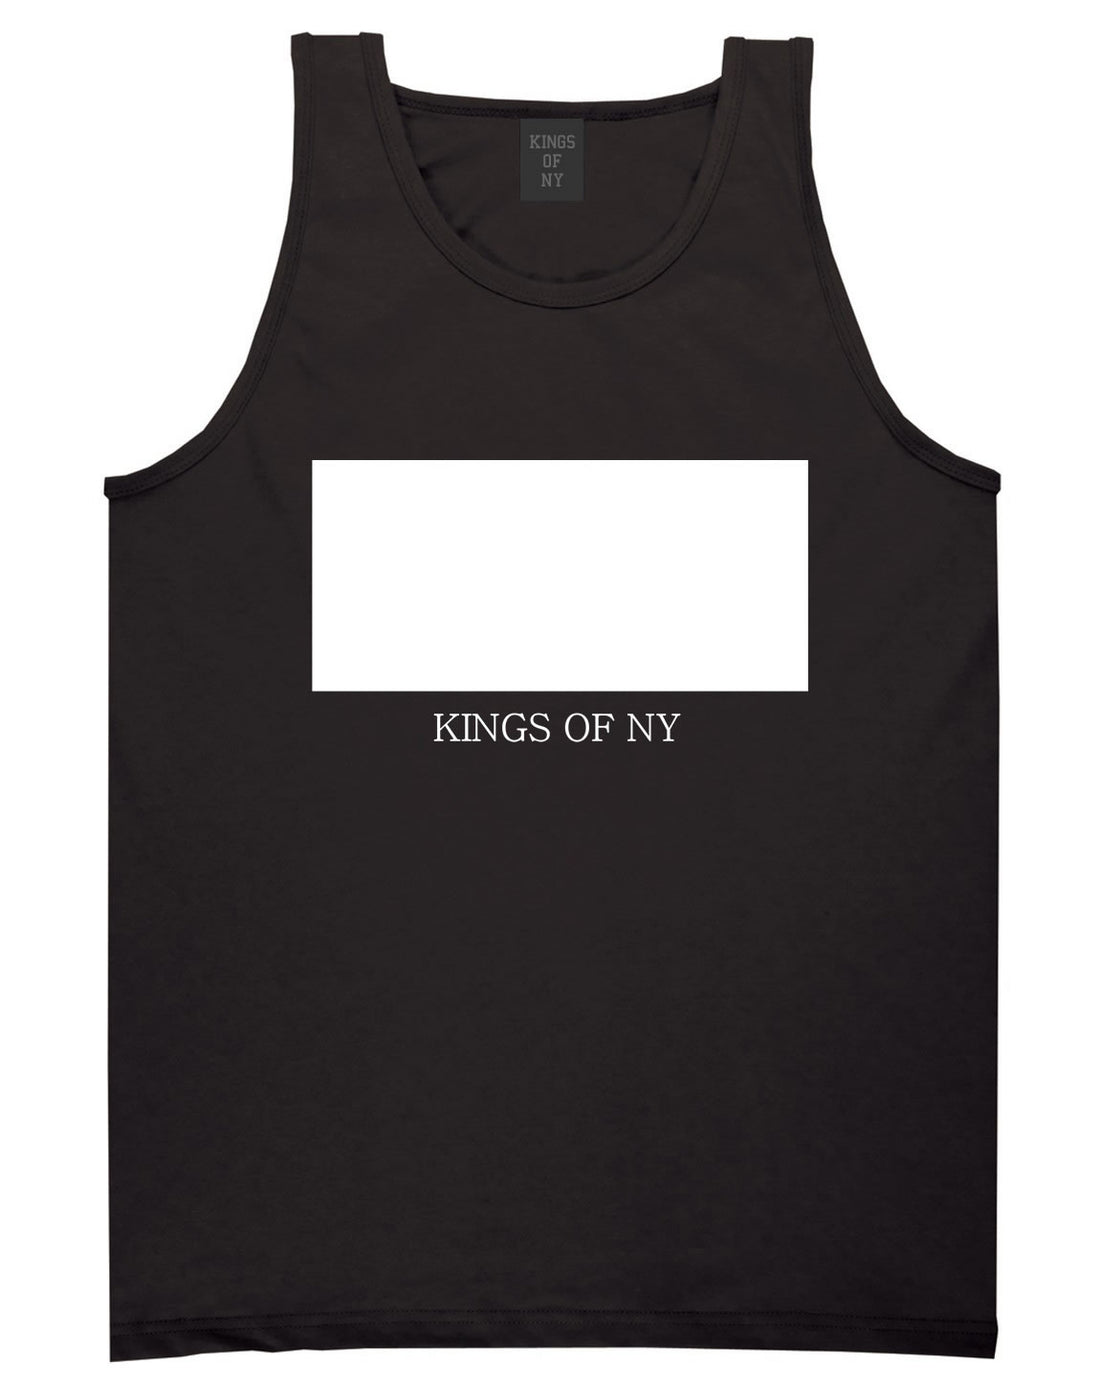 White Box Tank Top in Black by Kings Of NY